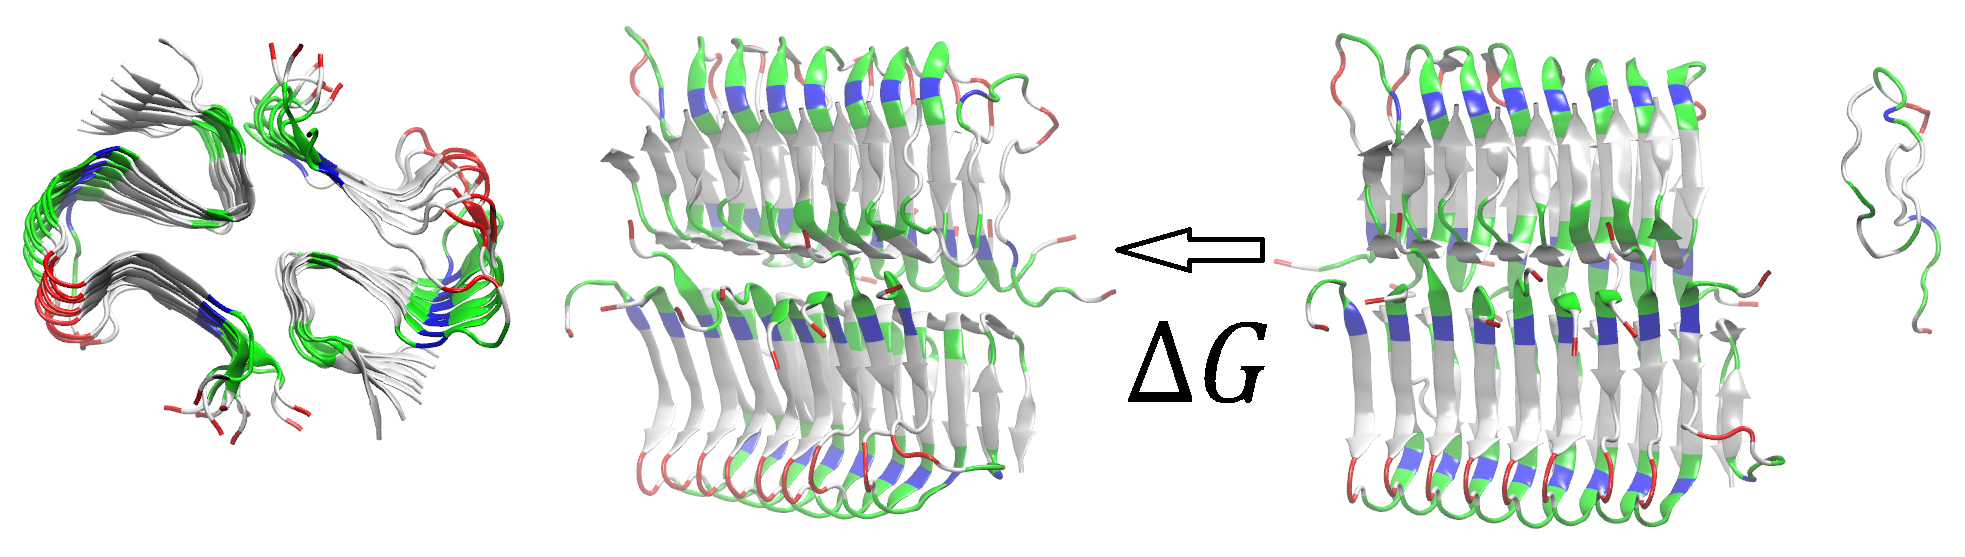 protein-protein binding